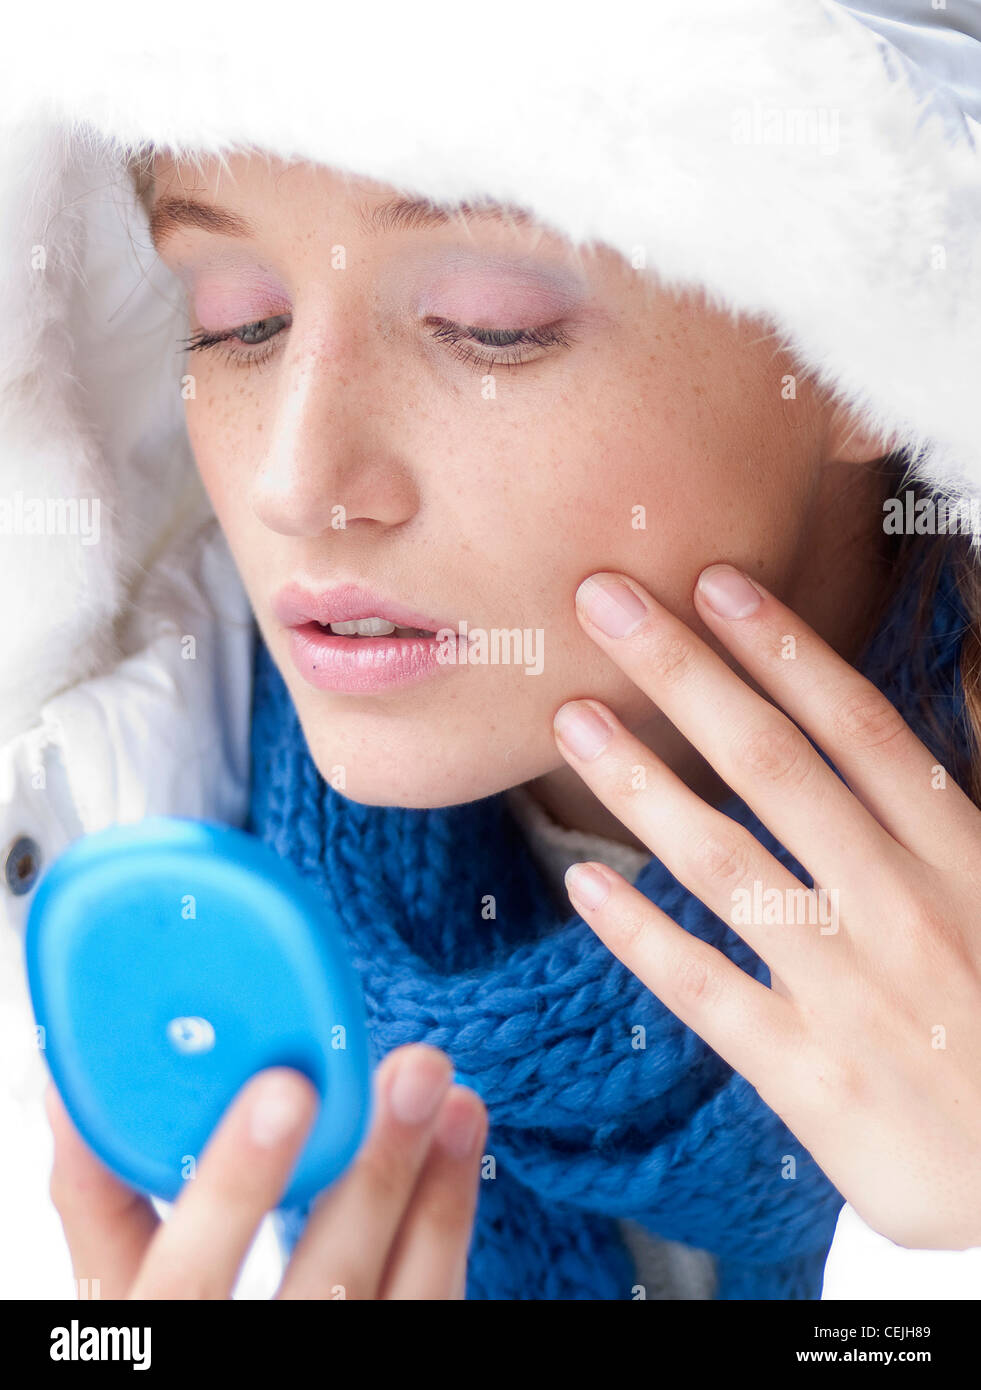 Female fair hair off her face, wearing a pink eyeshadow, white hooded parka and blue scarf, unsmiling, looking into a blue Stock Photo